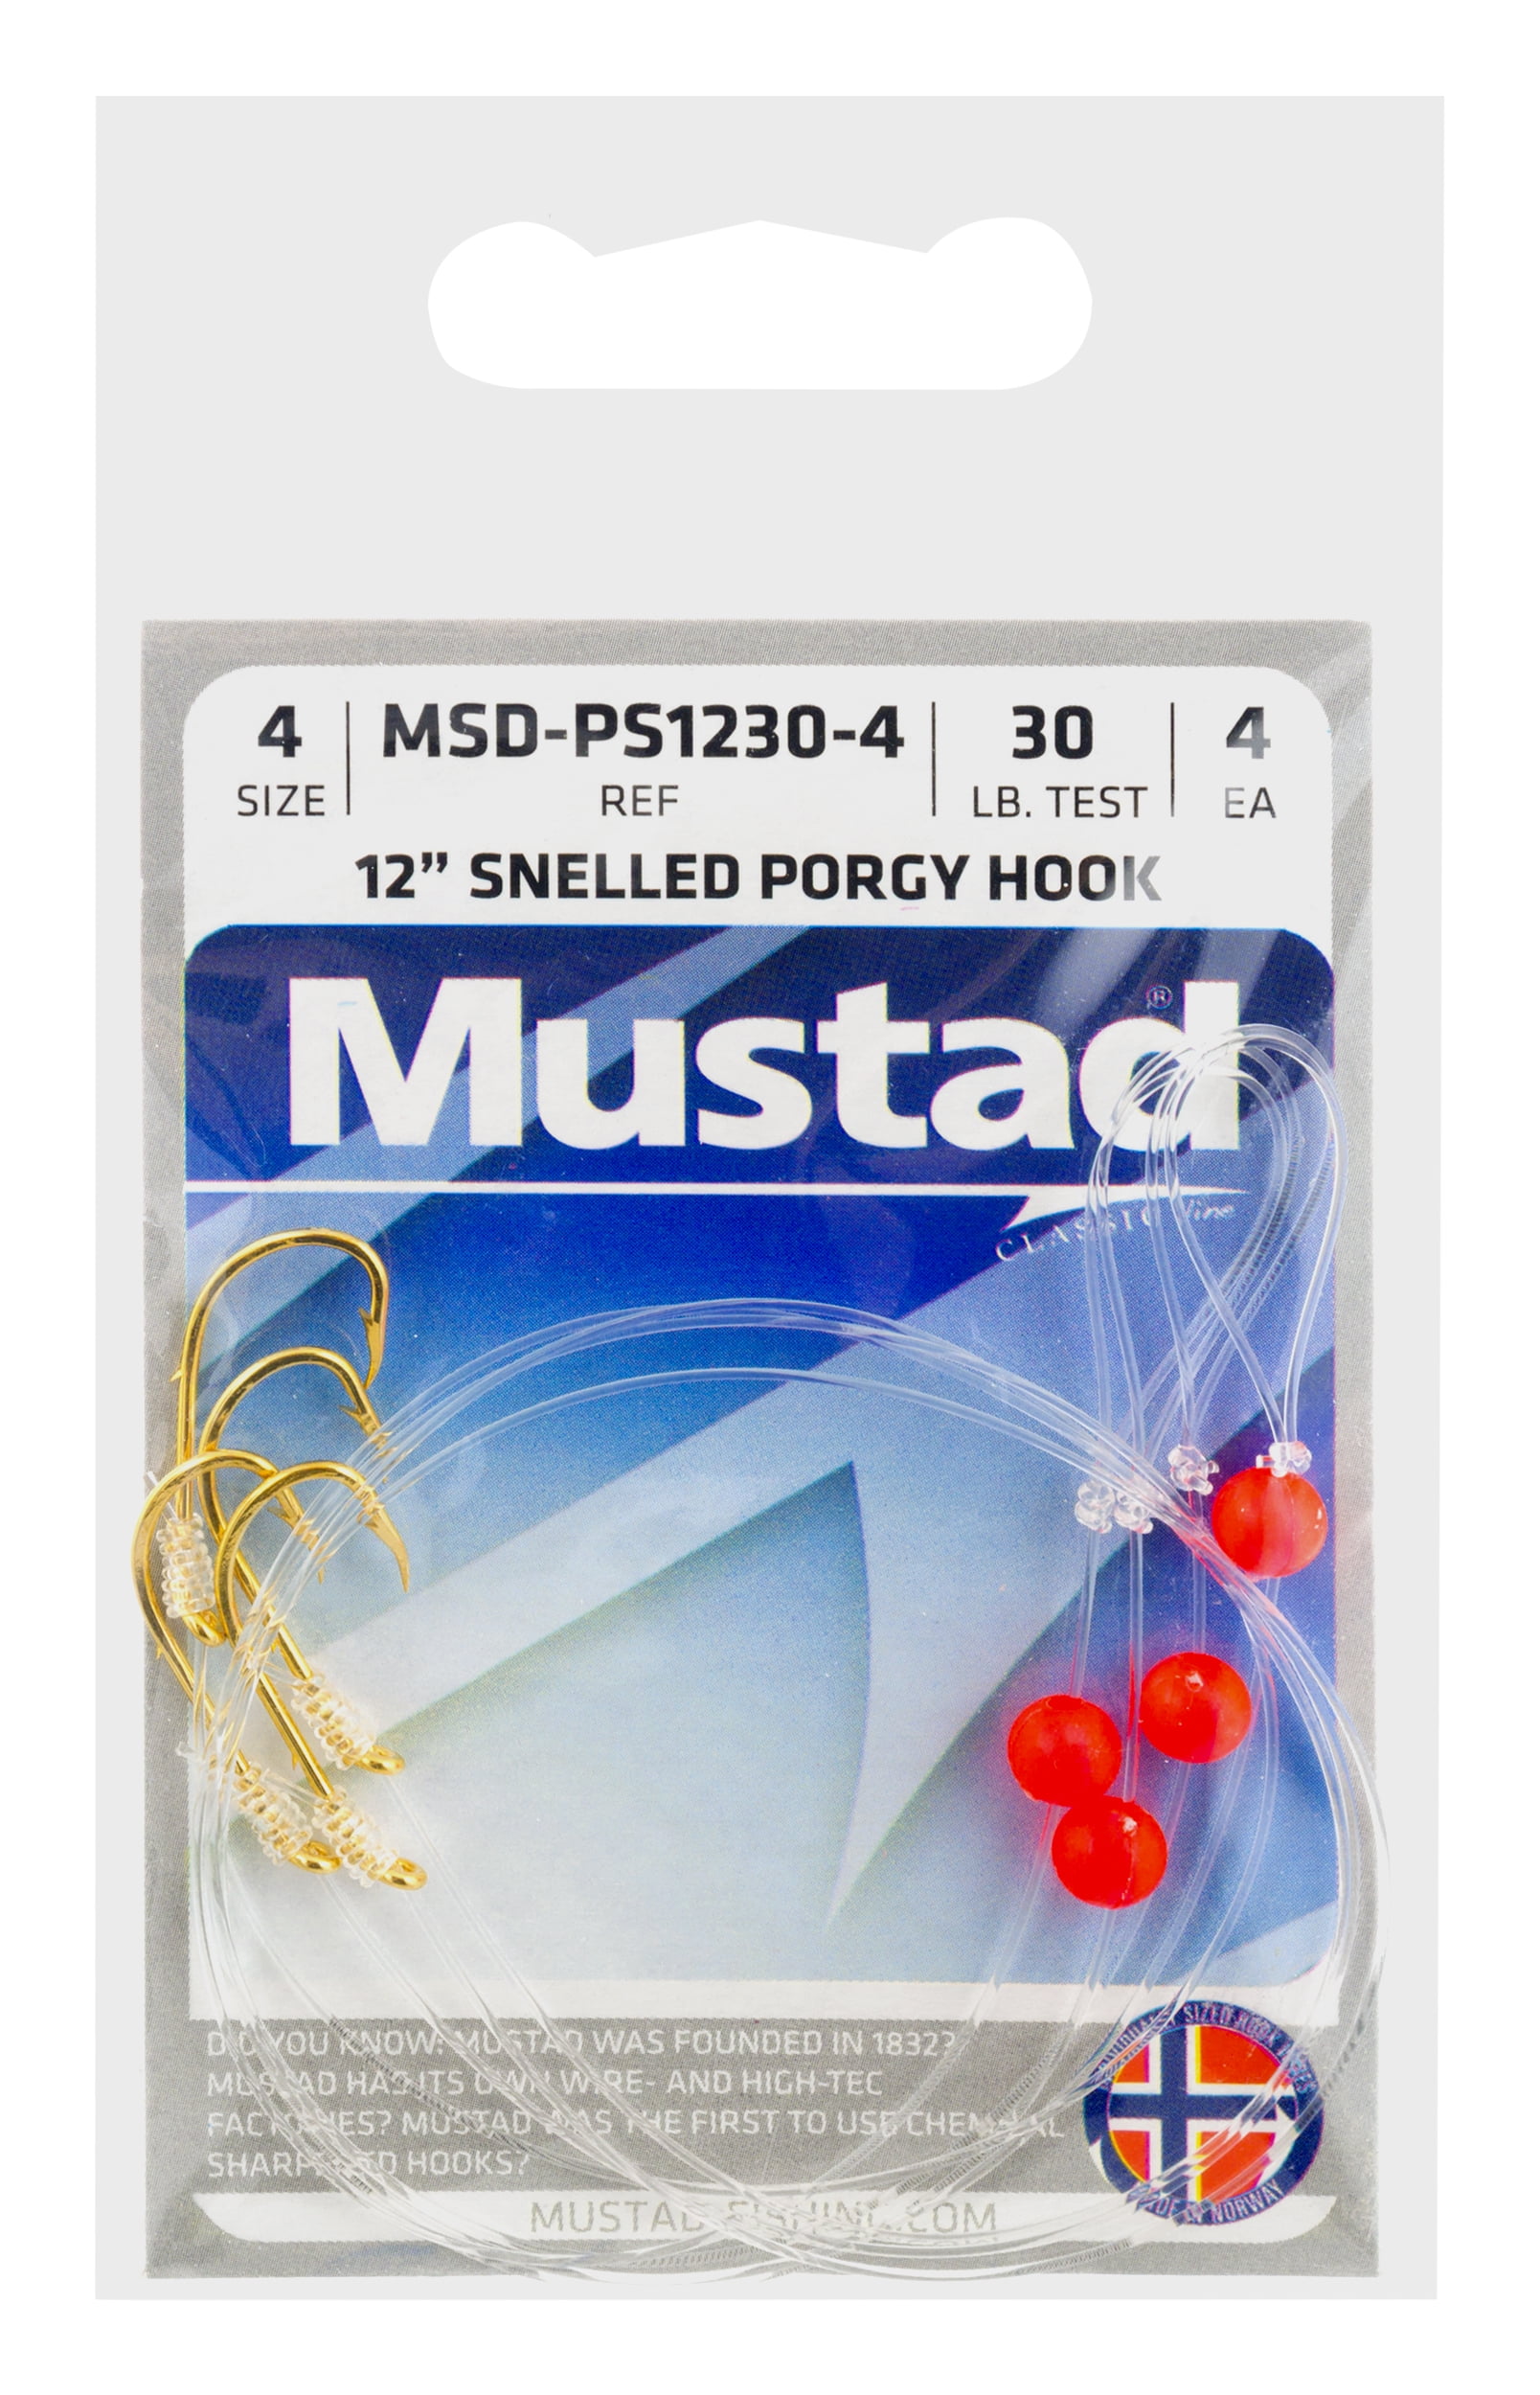 Mustad Classic Line Size 4 12 Snelled Porgy Hooks, 4 ct 